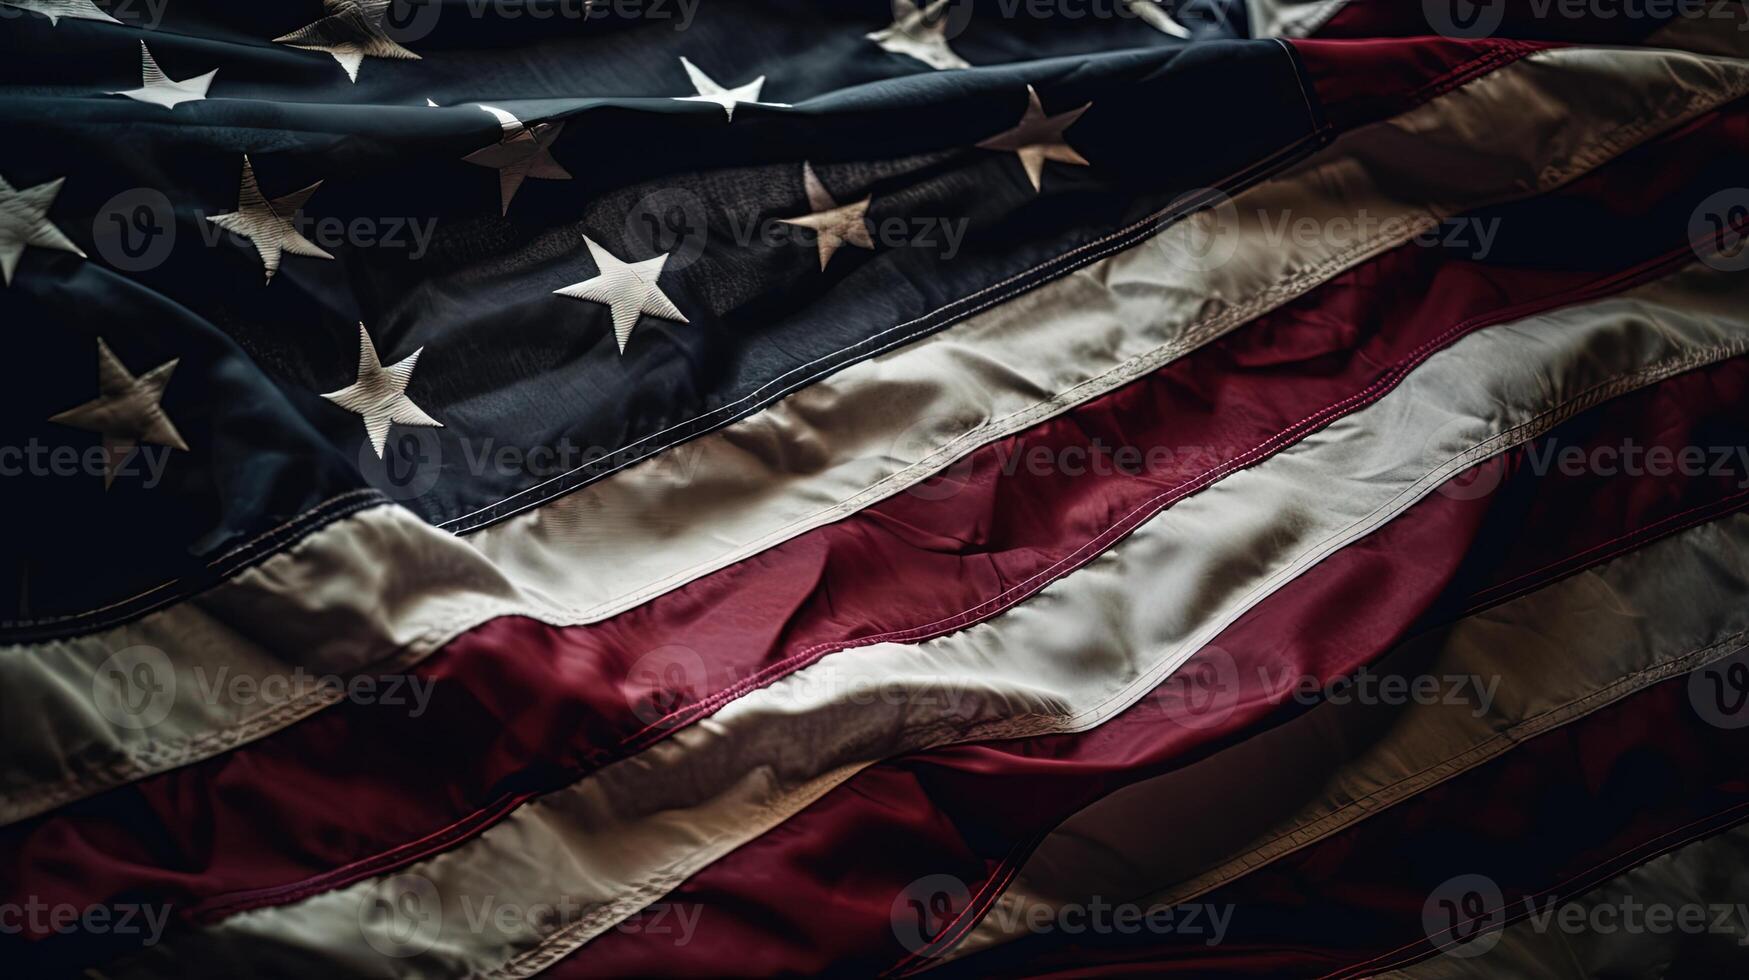 Capturing Image of USA National Fabric Flag Background. Concept of 4th of July, Memorial Day, Veterans Day, American independence Day Celebration, Technology. photo